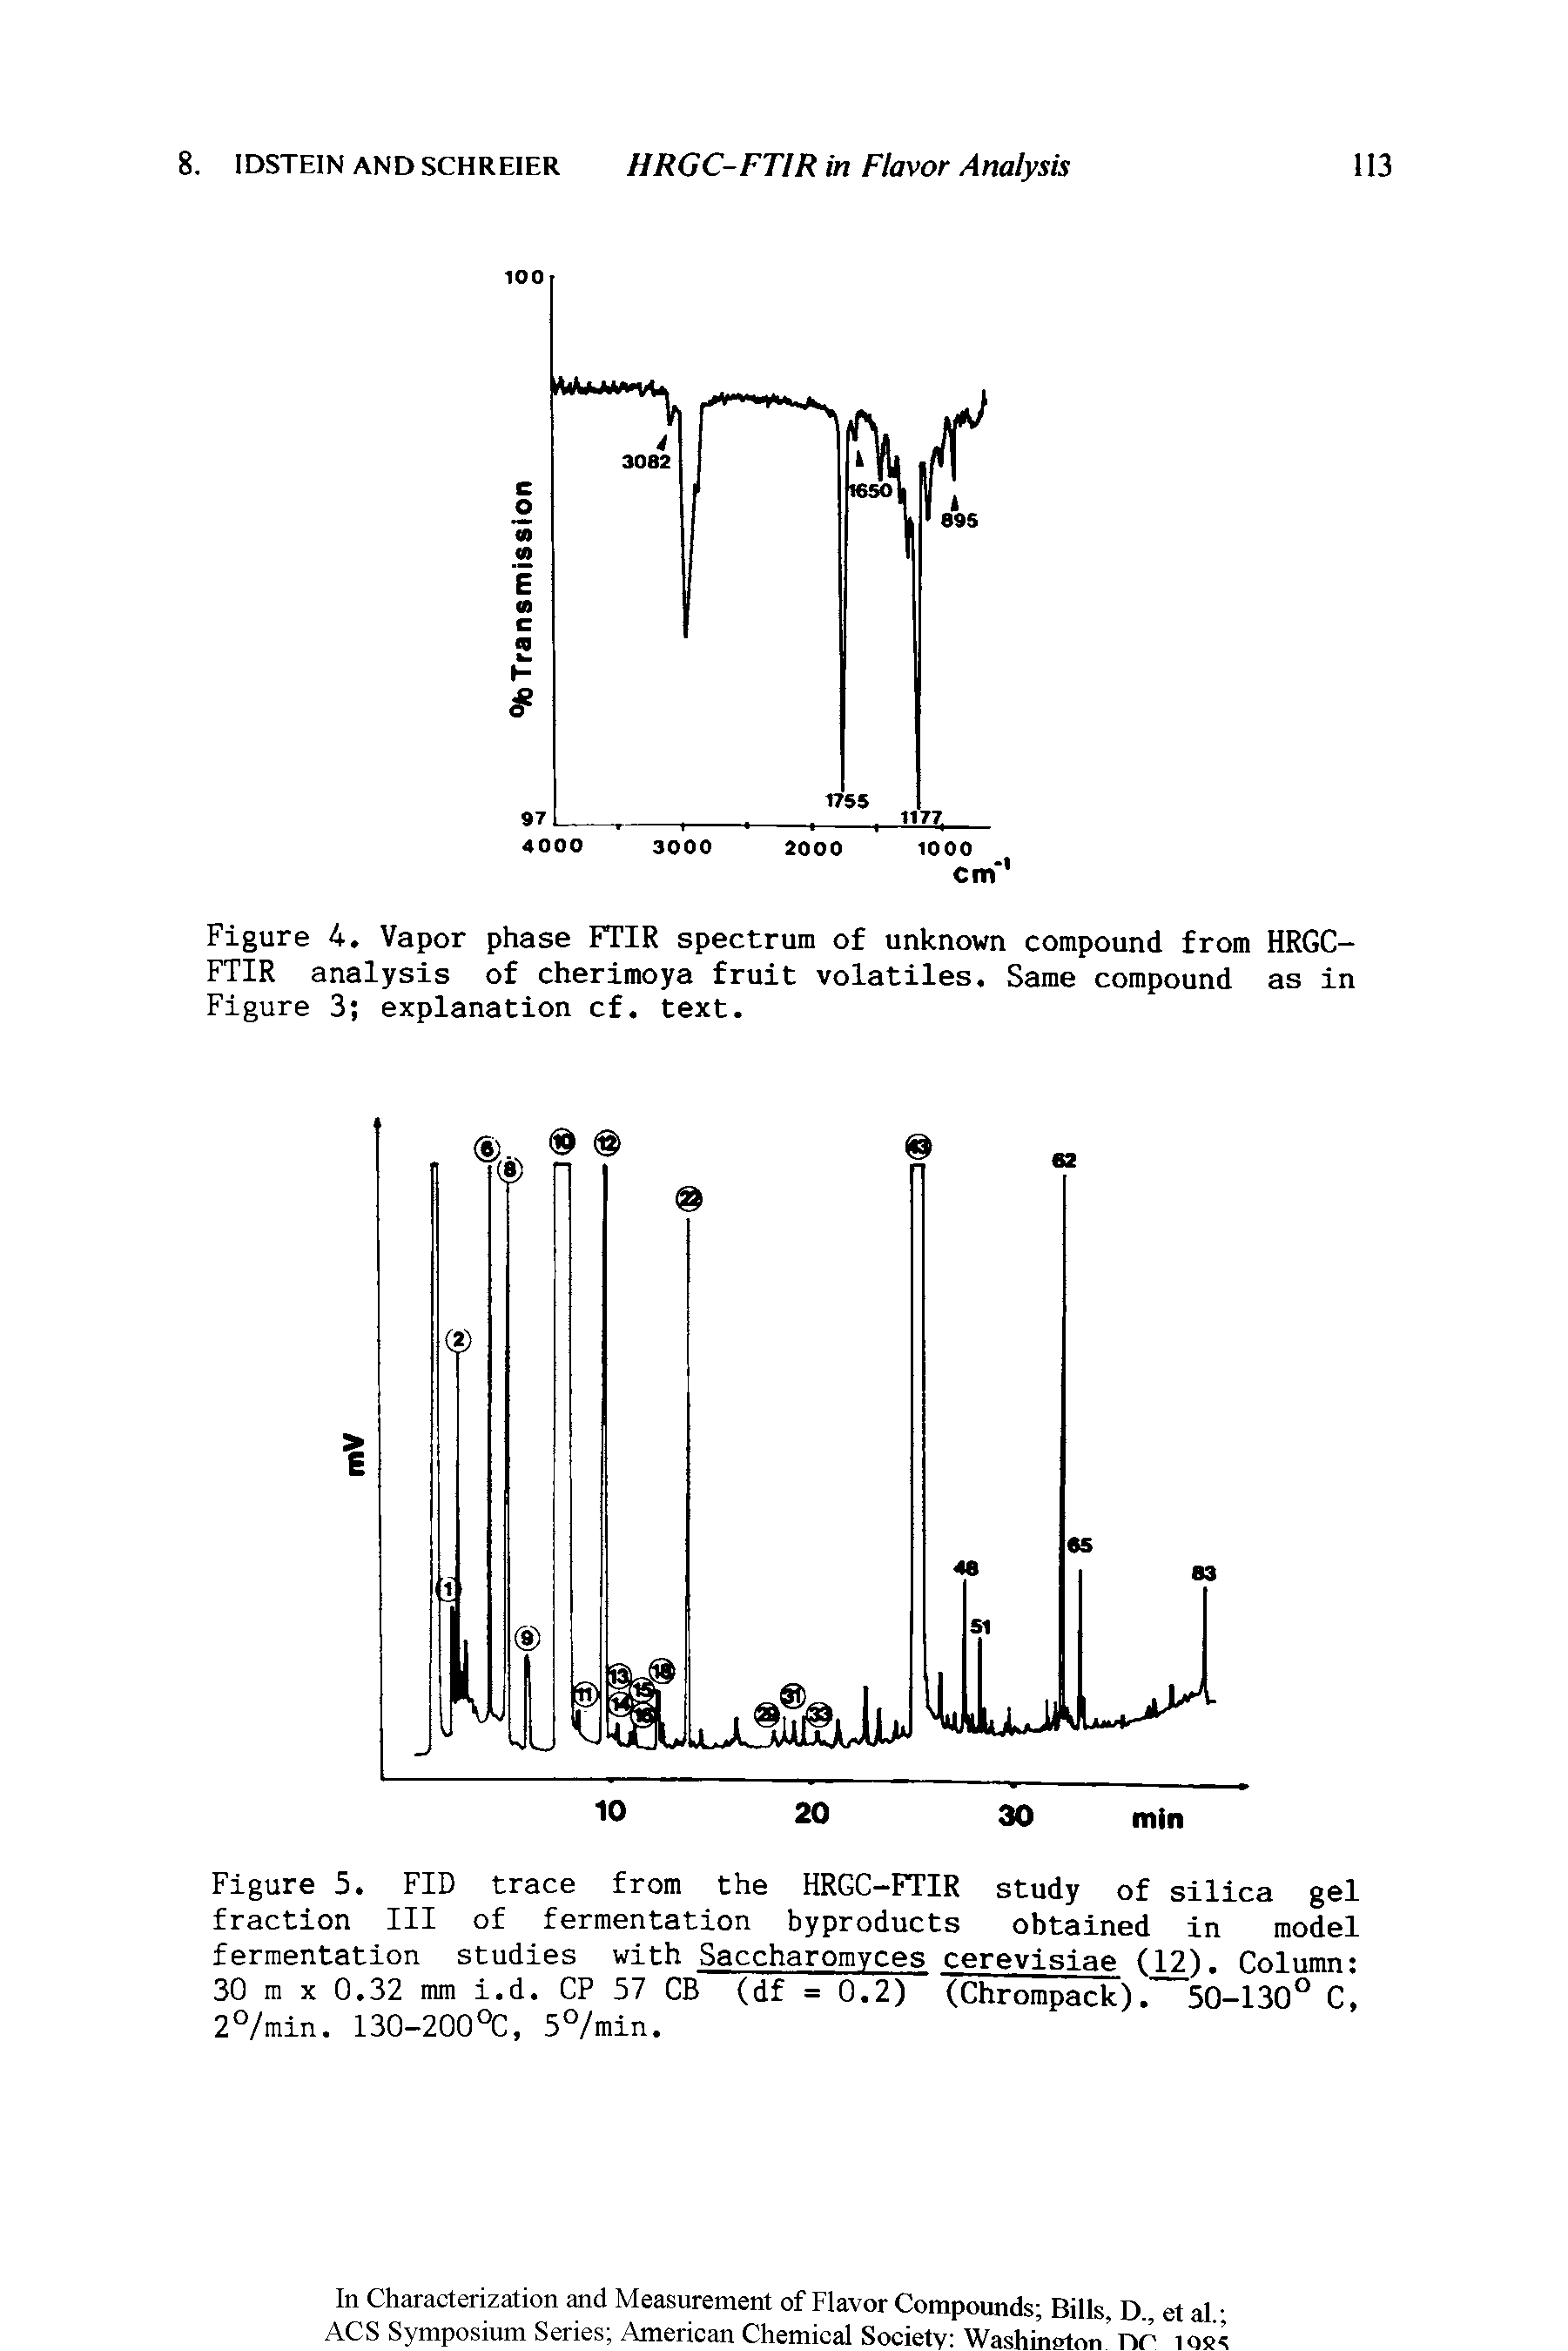 Figure 5. FID trace from the HRGC-FTIR study of silica gel fraction III of fermentation byproducts obtained in model fermentation studies with Saccharomvces cerevisiae Column 30 m x 0.32 mm i.d. CP 57 CB (df = 0.2) (Chrompack). 50-130° C, 2°/min. 130-200°C, 5°/min.